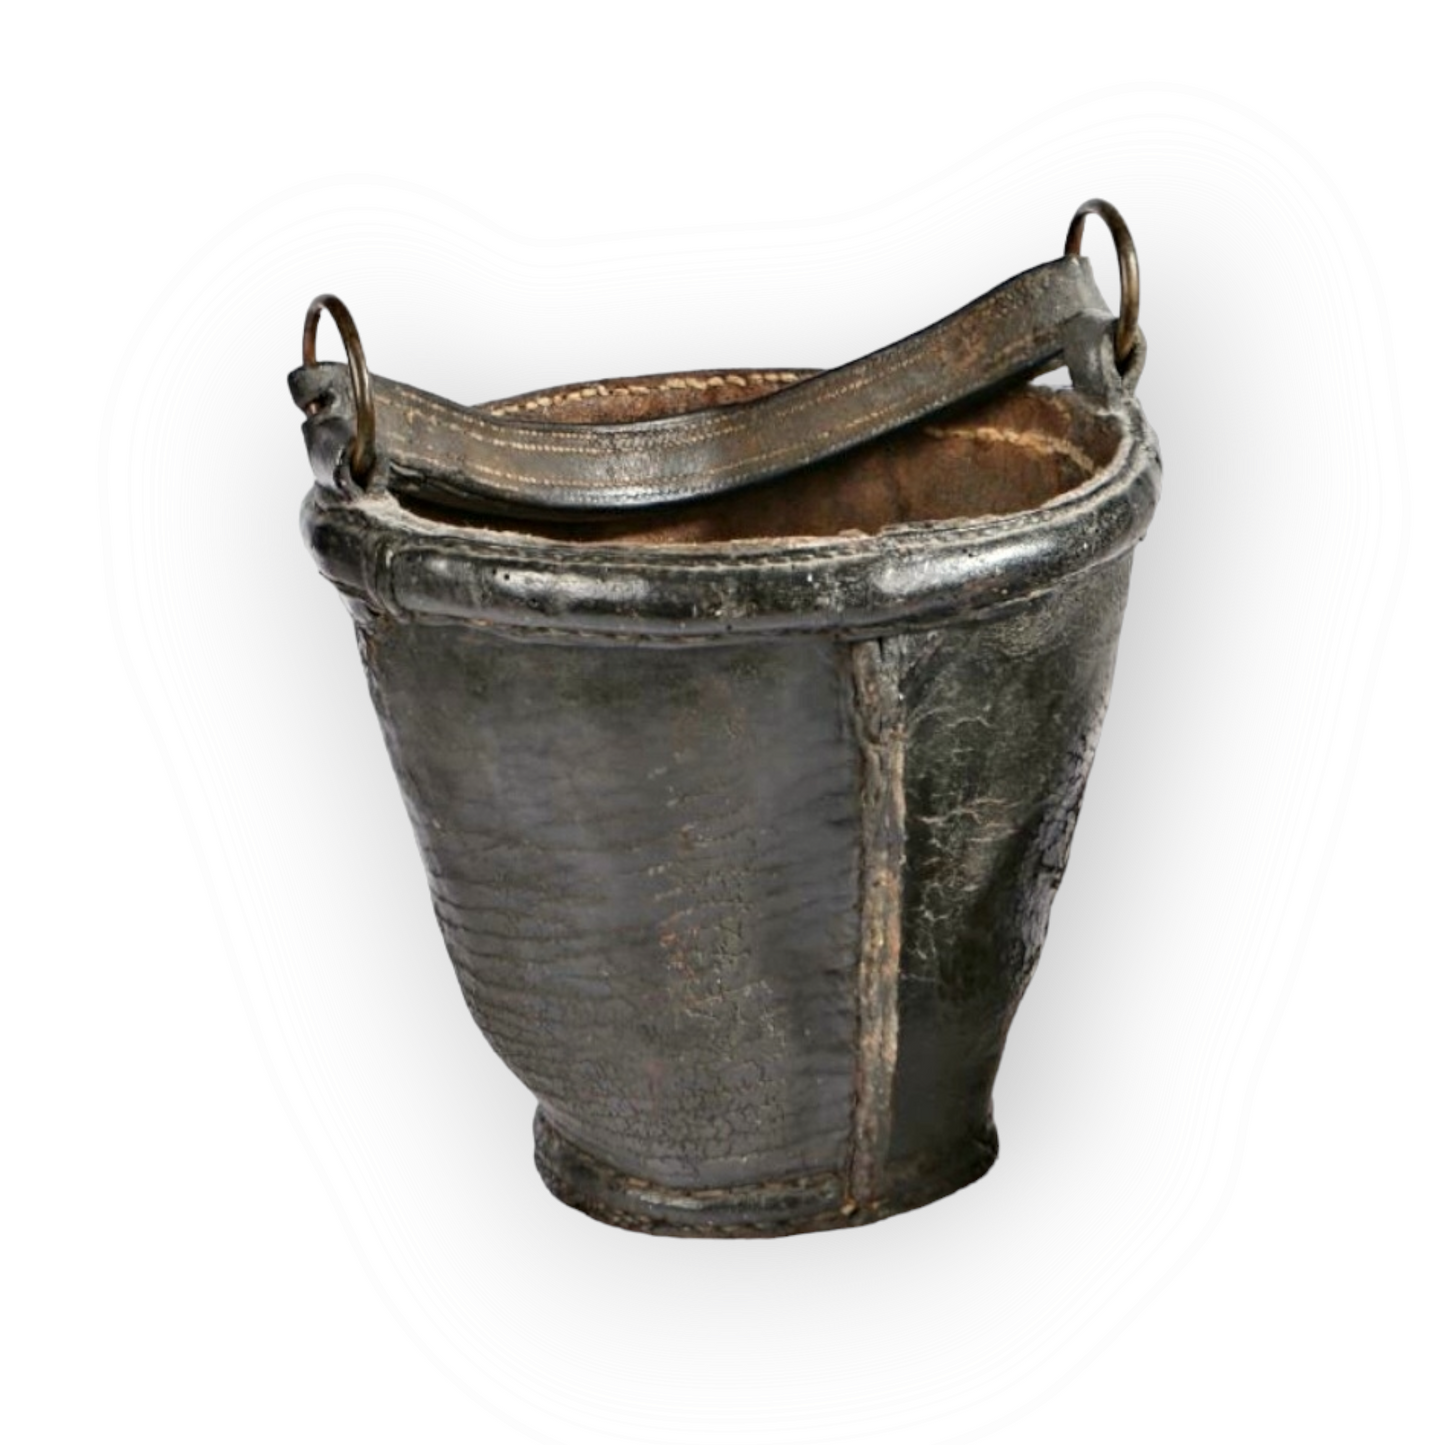 An 18th Century George III Period English Antique Leather Fire Bucket, circa 1760-1800